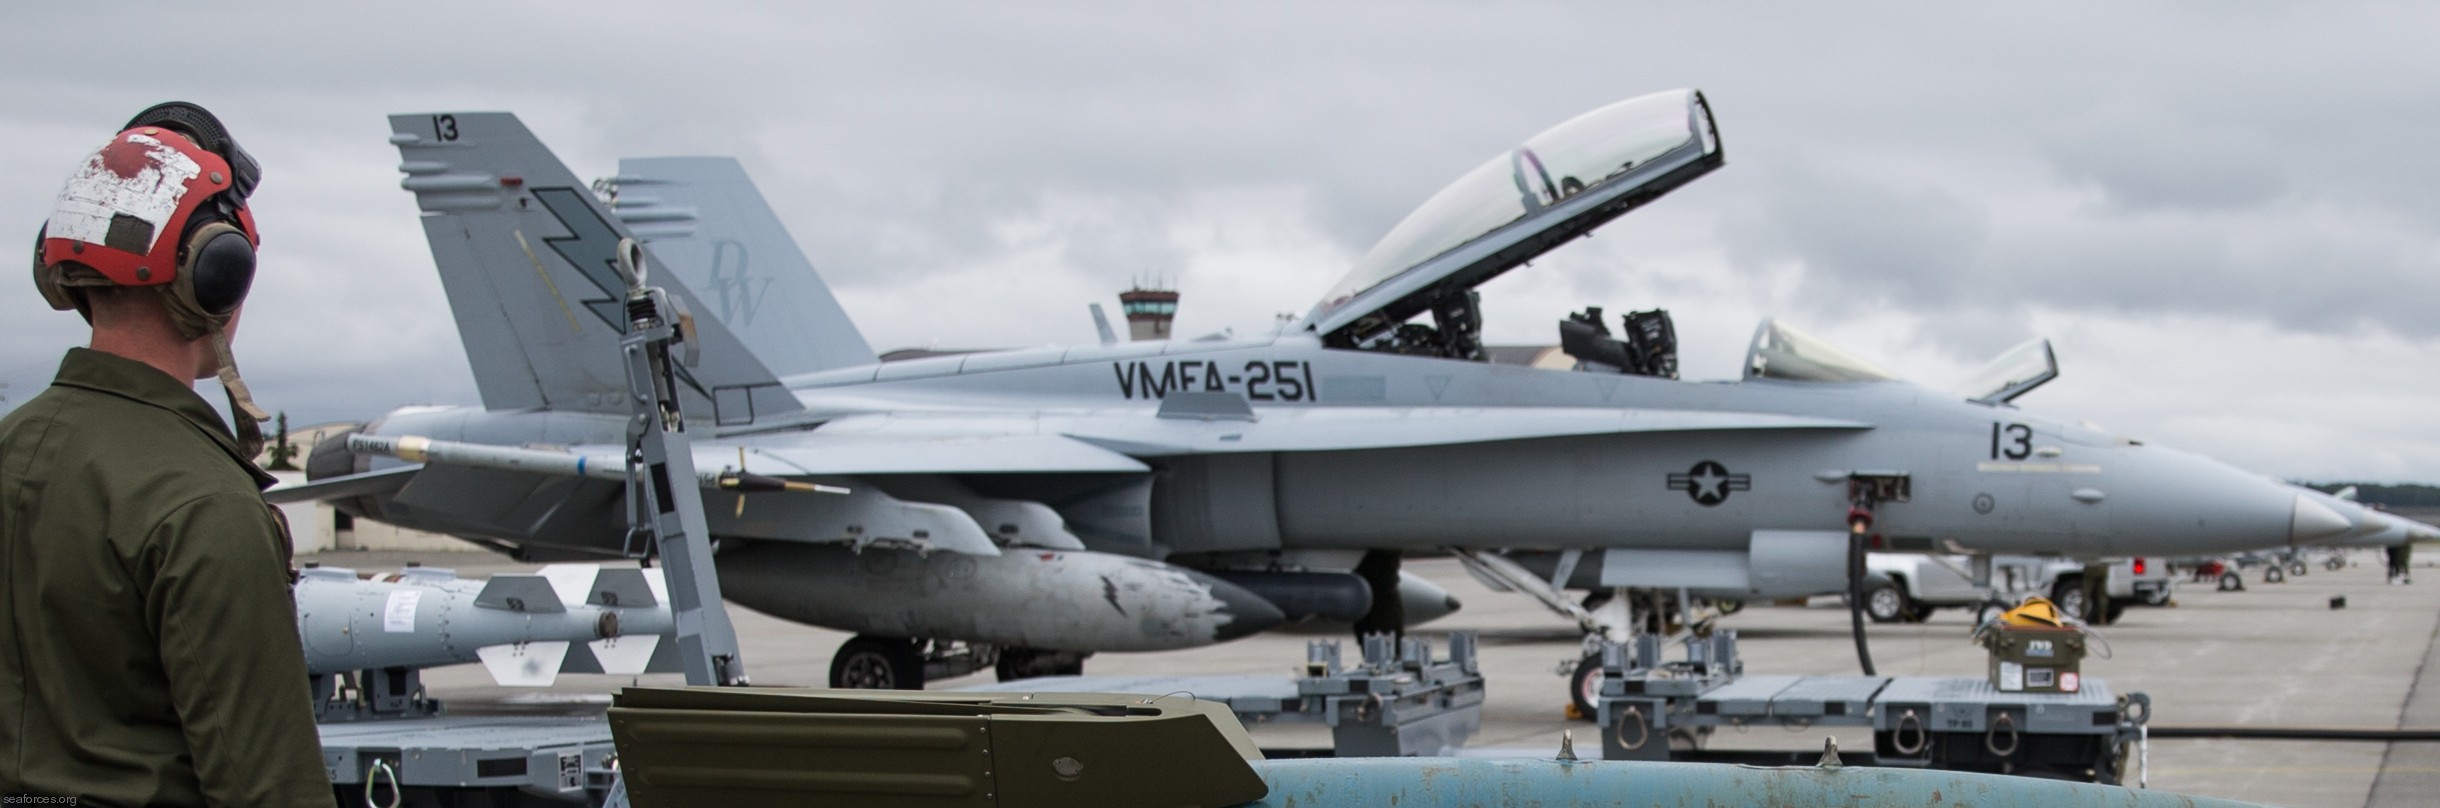 vmfa-251 thunderbolts marine fighter attack squadron f/a-18d hornet 97